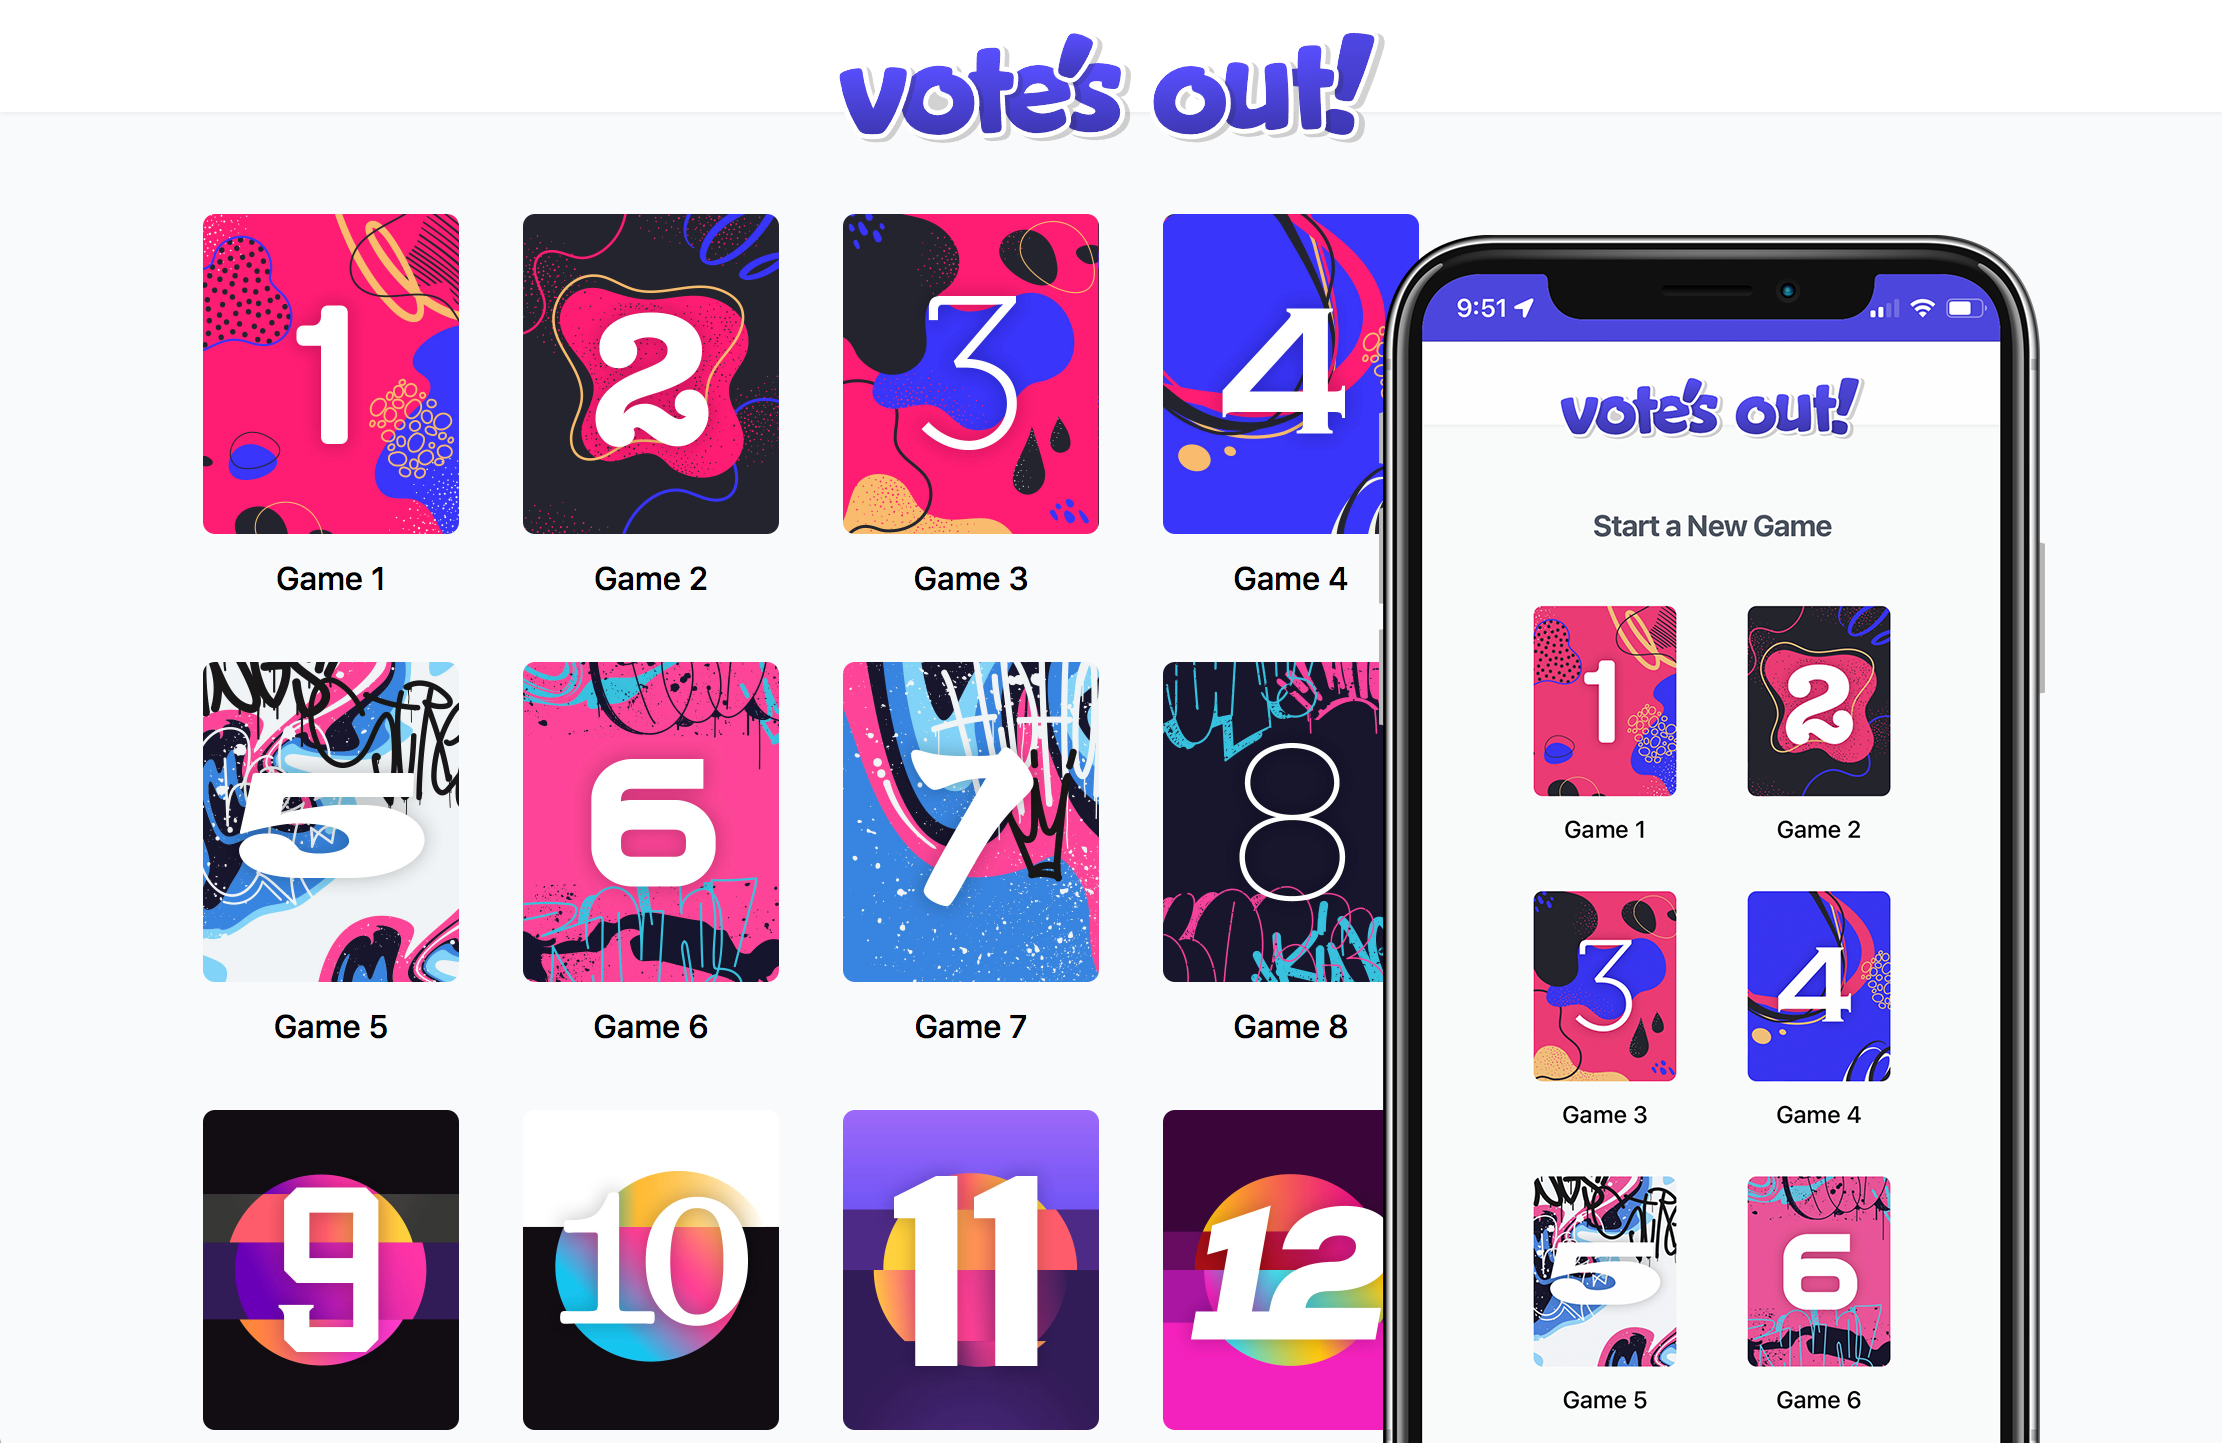 The Vote's Out Landing page